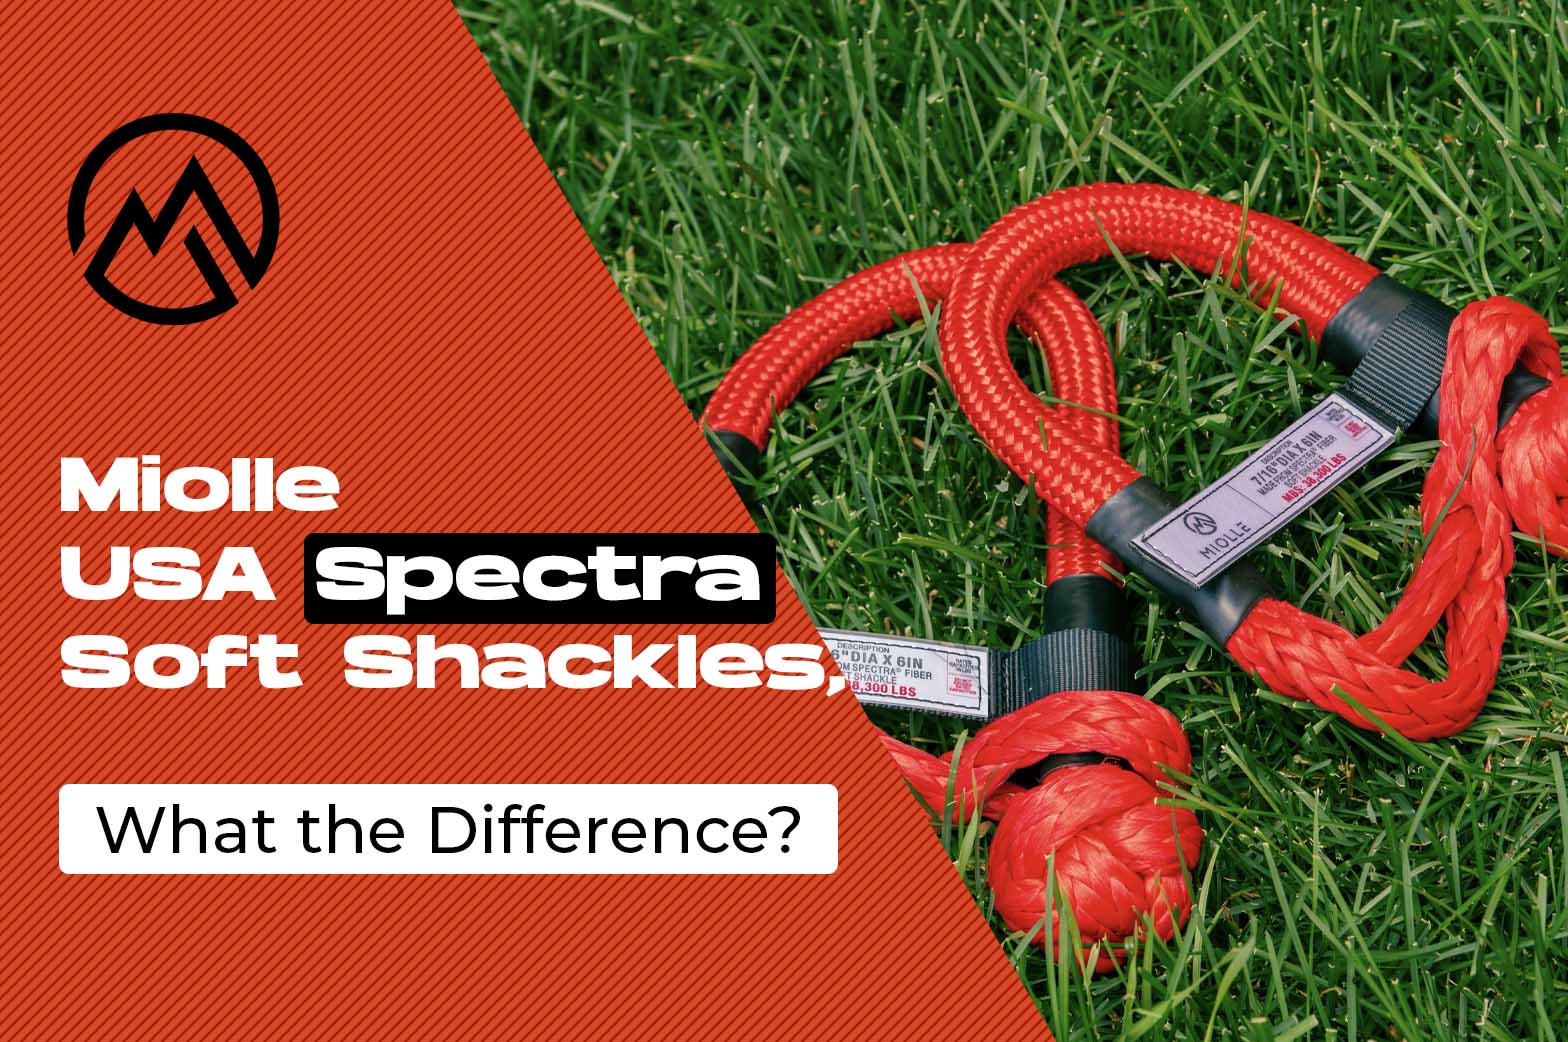 Miolle USA Spectra Soft Shackles, What the Difference?